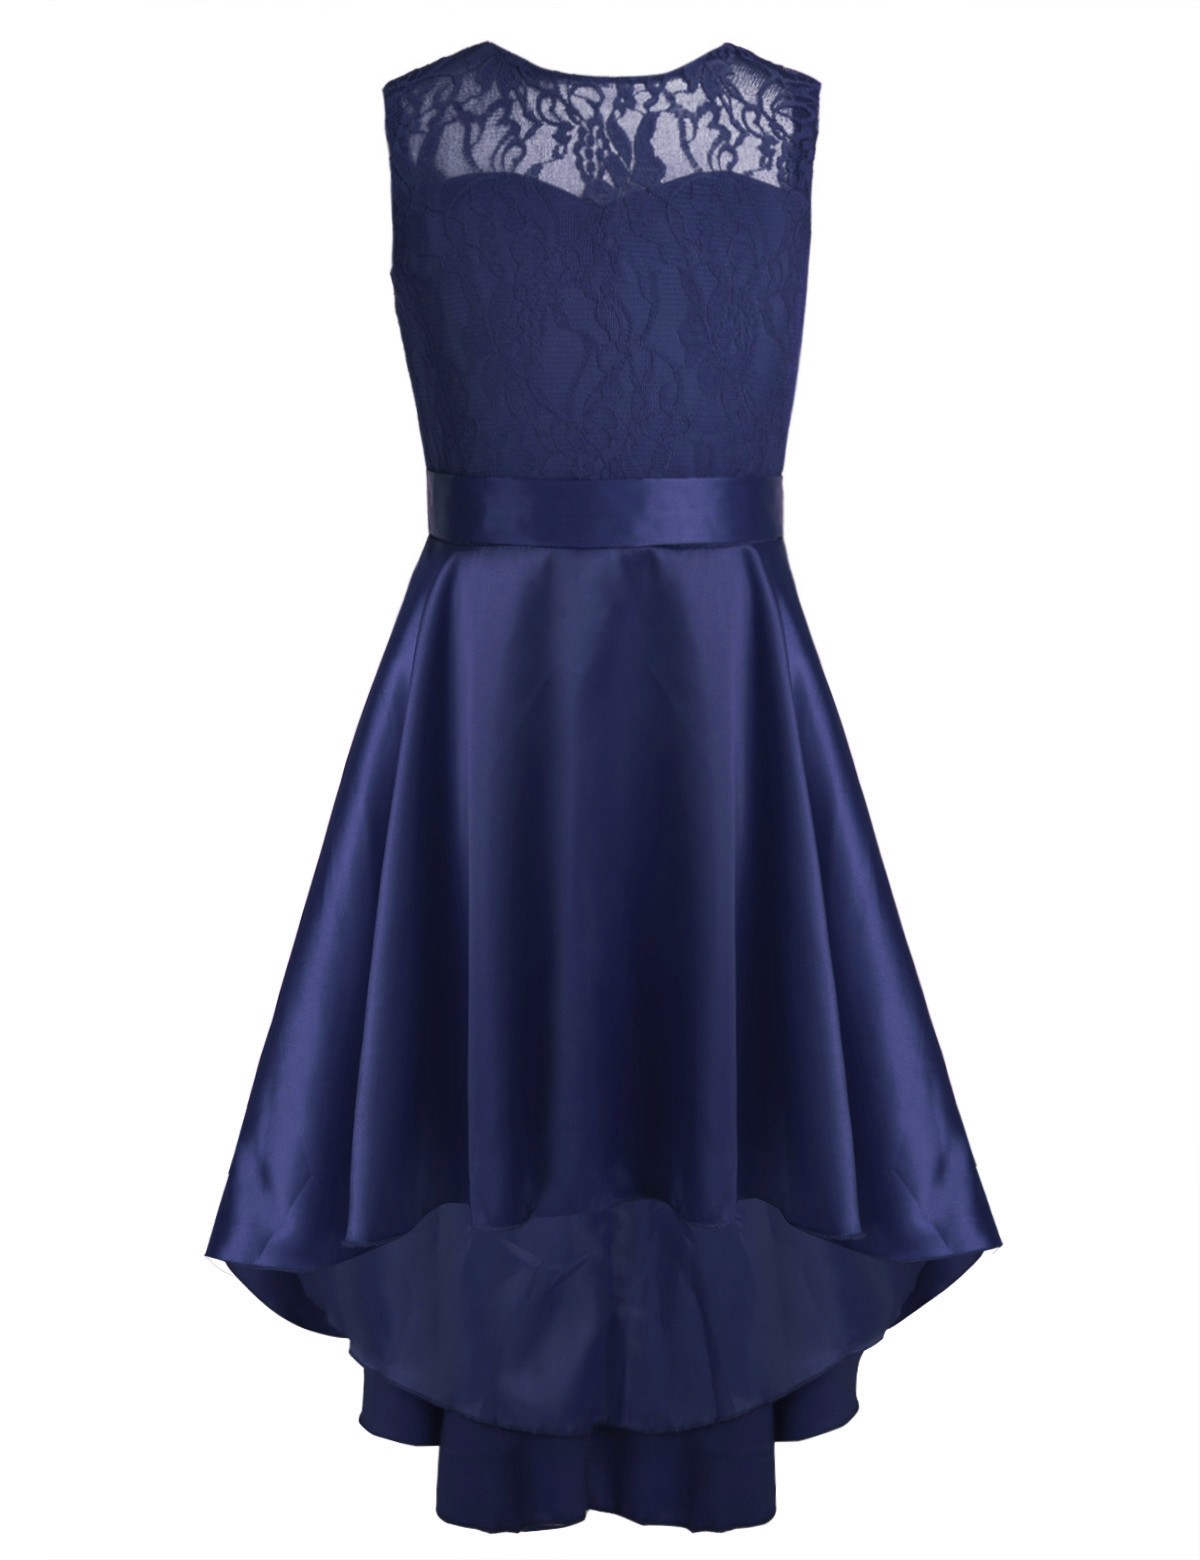 blue dress for birthday party